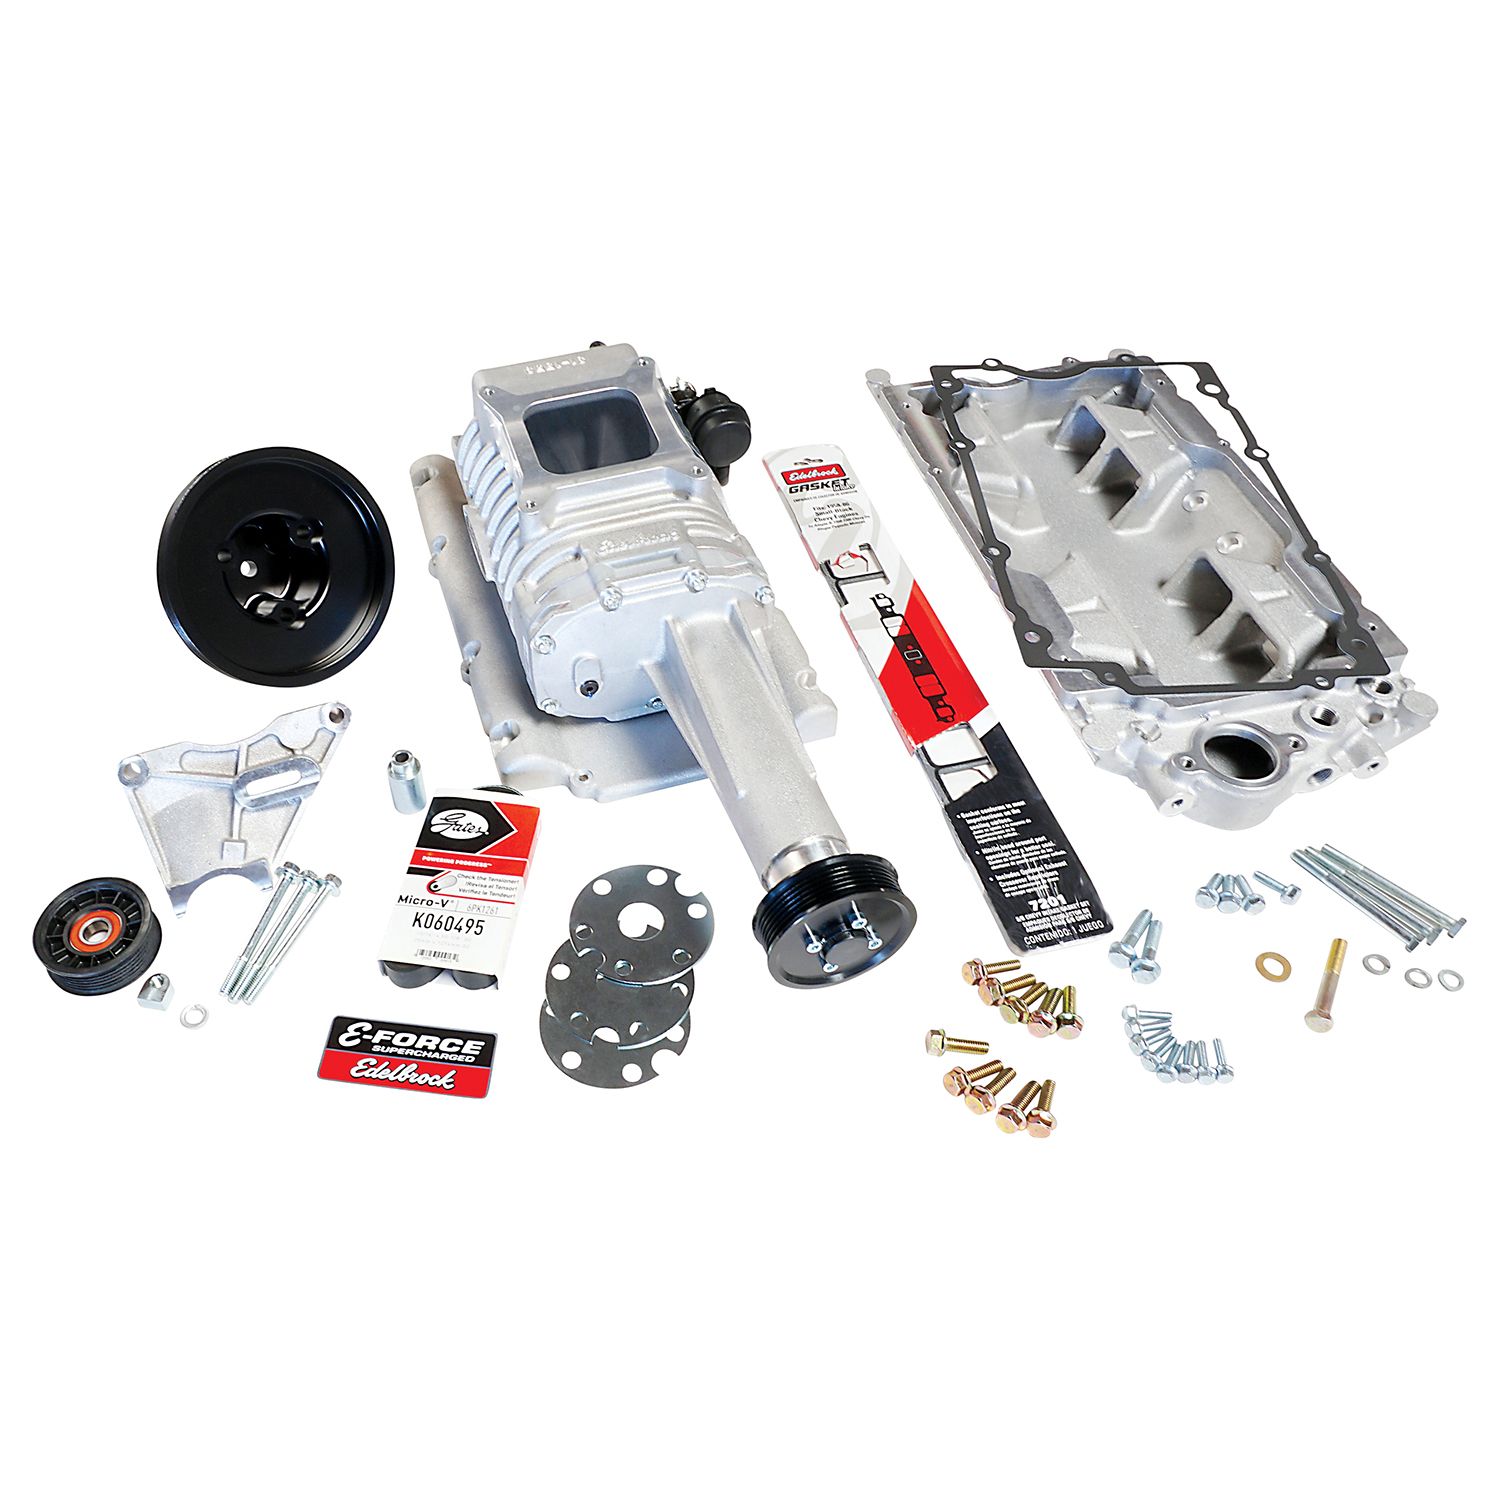 Edelbrock Supercharger Kit #1552 For 1996-Later Chevy Small-Block – Carbureted